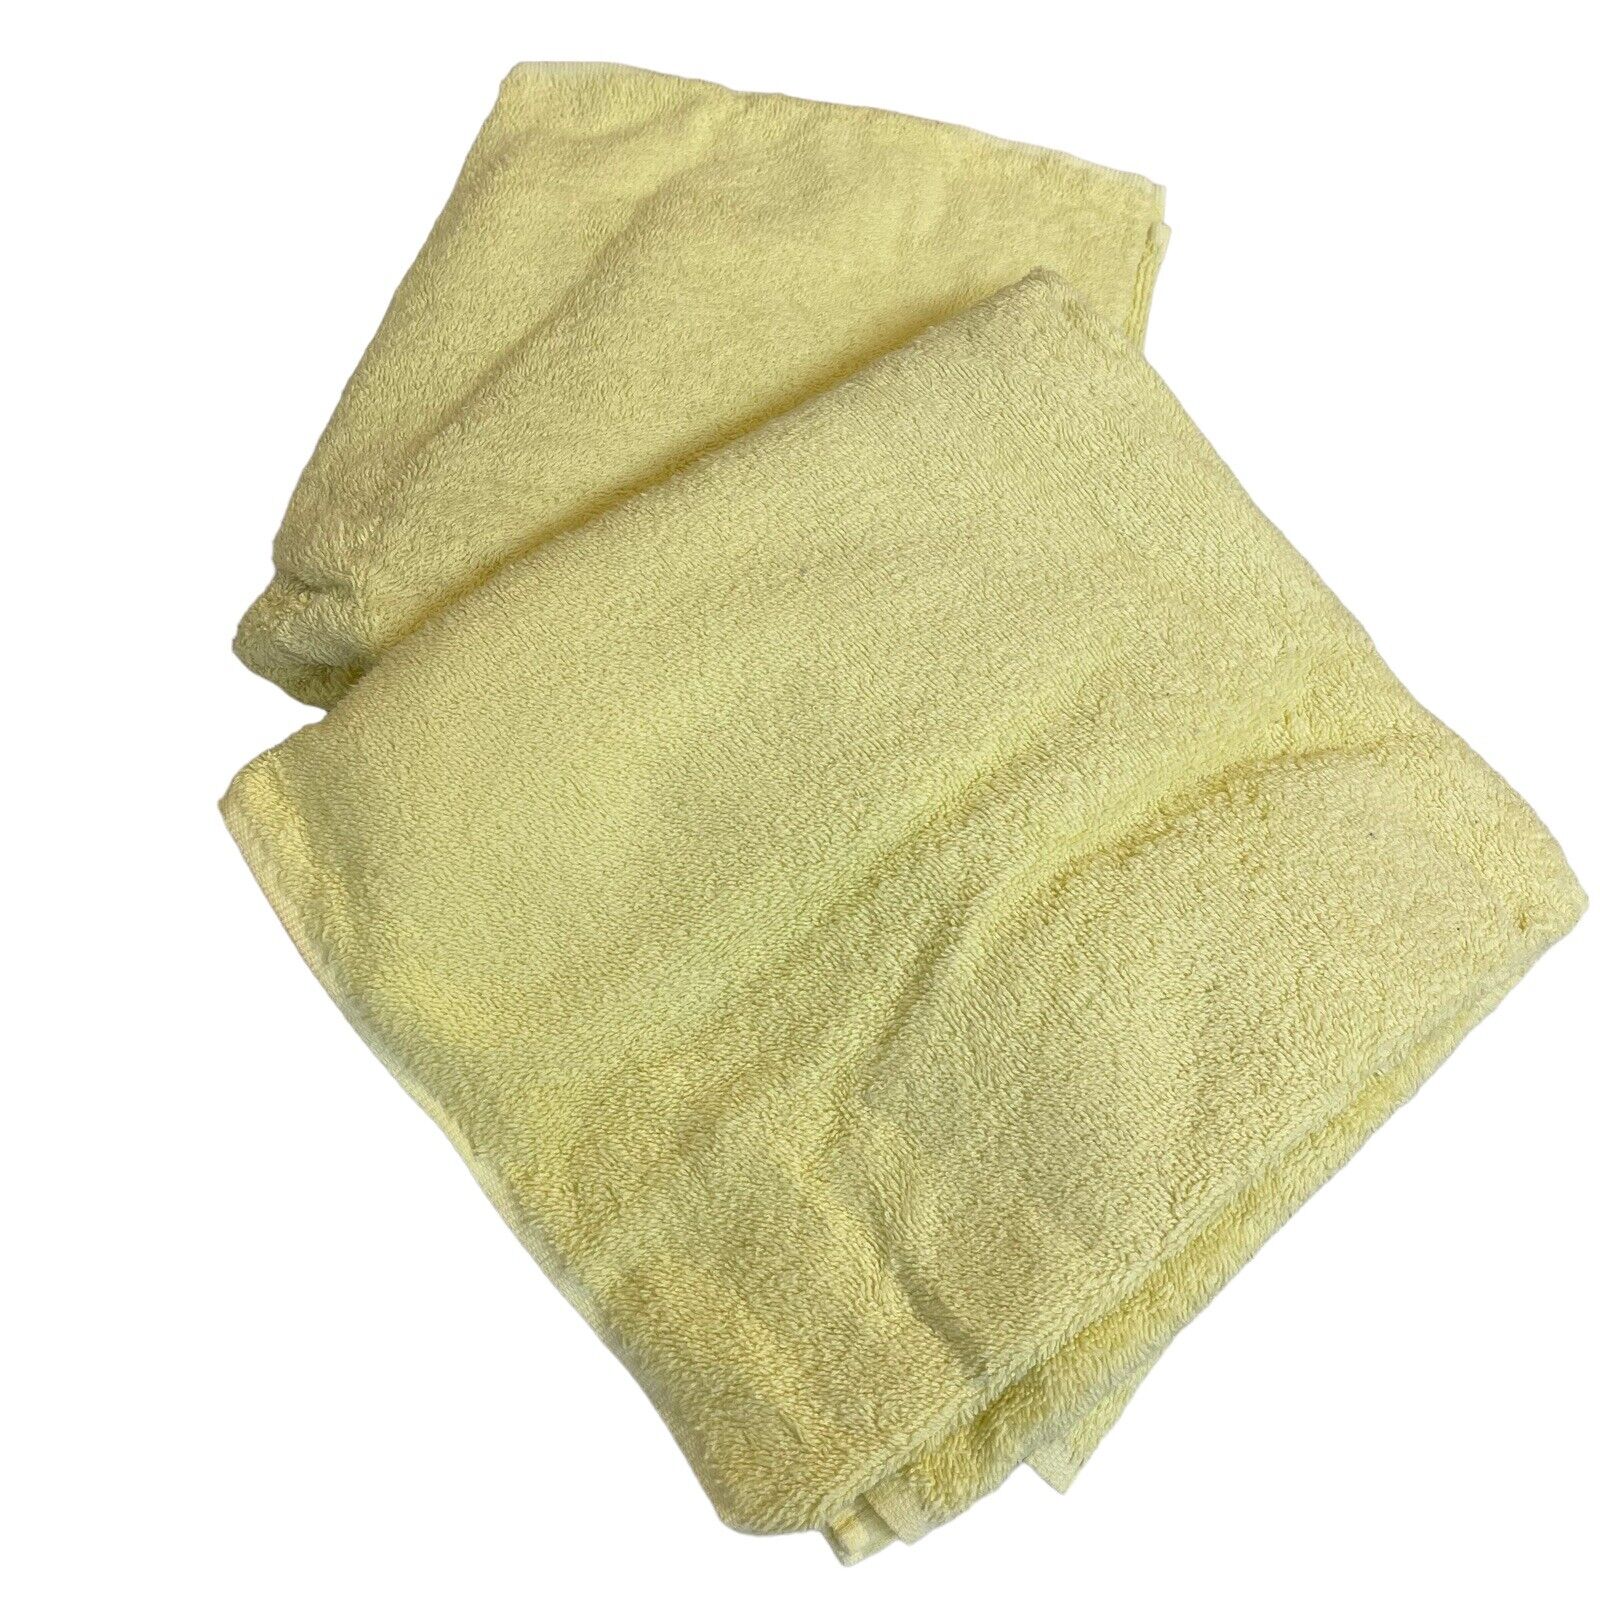 Pair of Vintage Dundee Bath Towels Yellow 100% Cotton USA Made